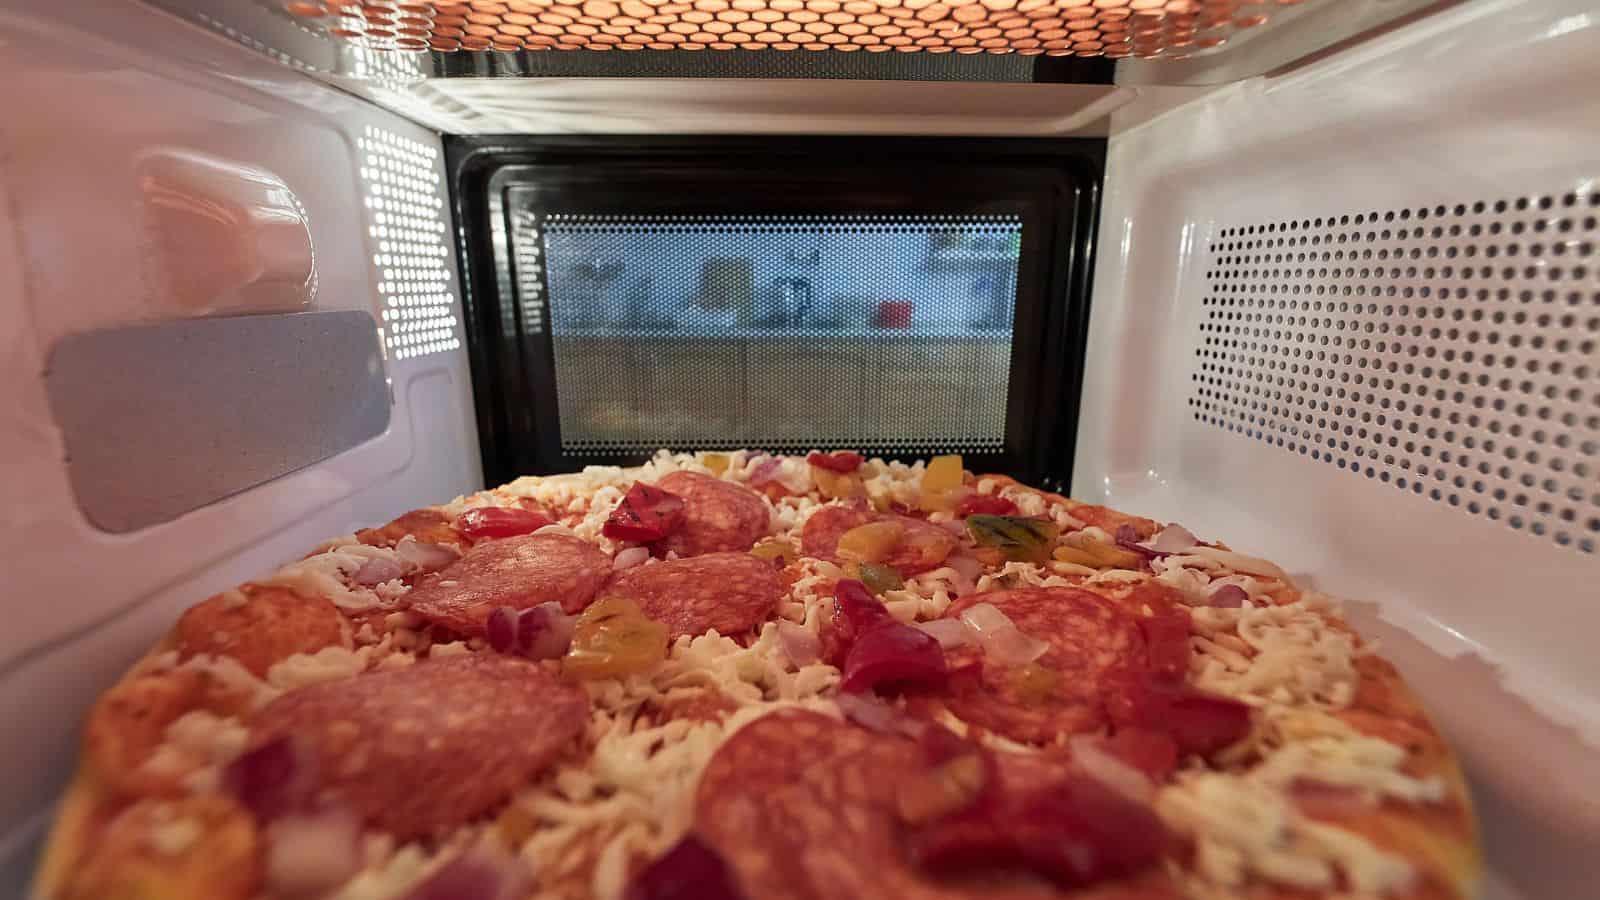 Heating pizza in a microwave oven.